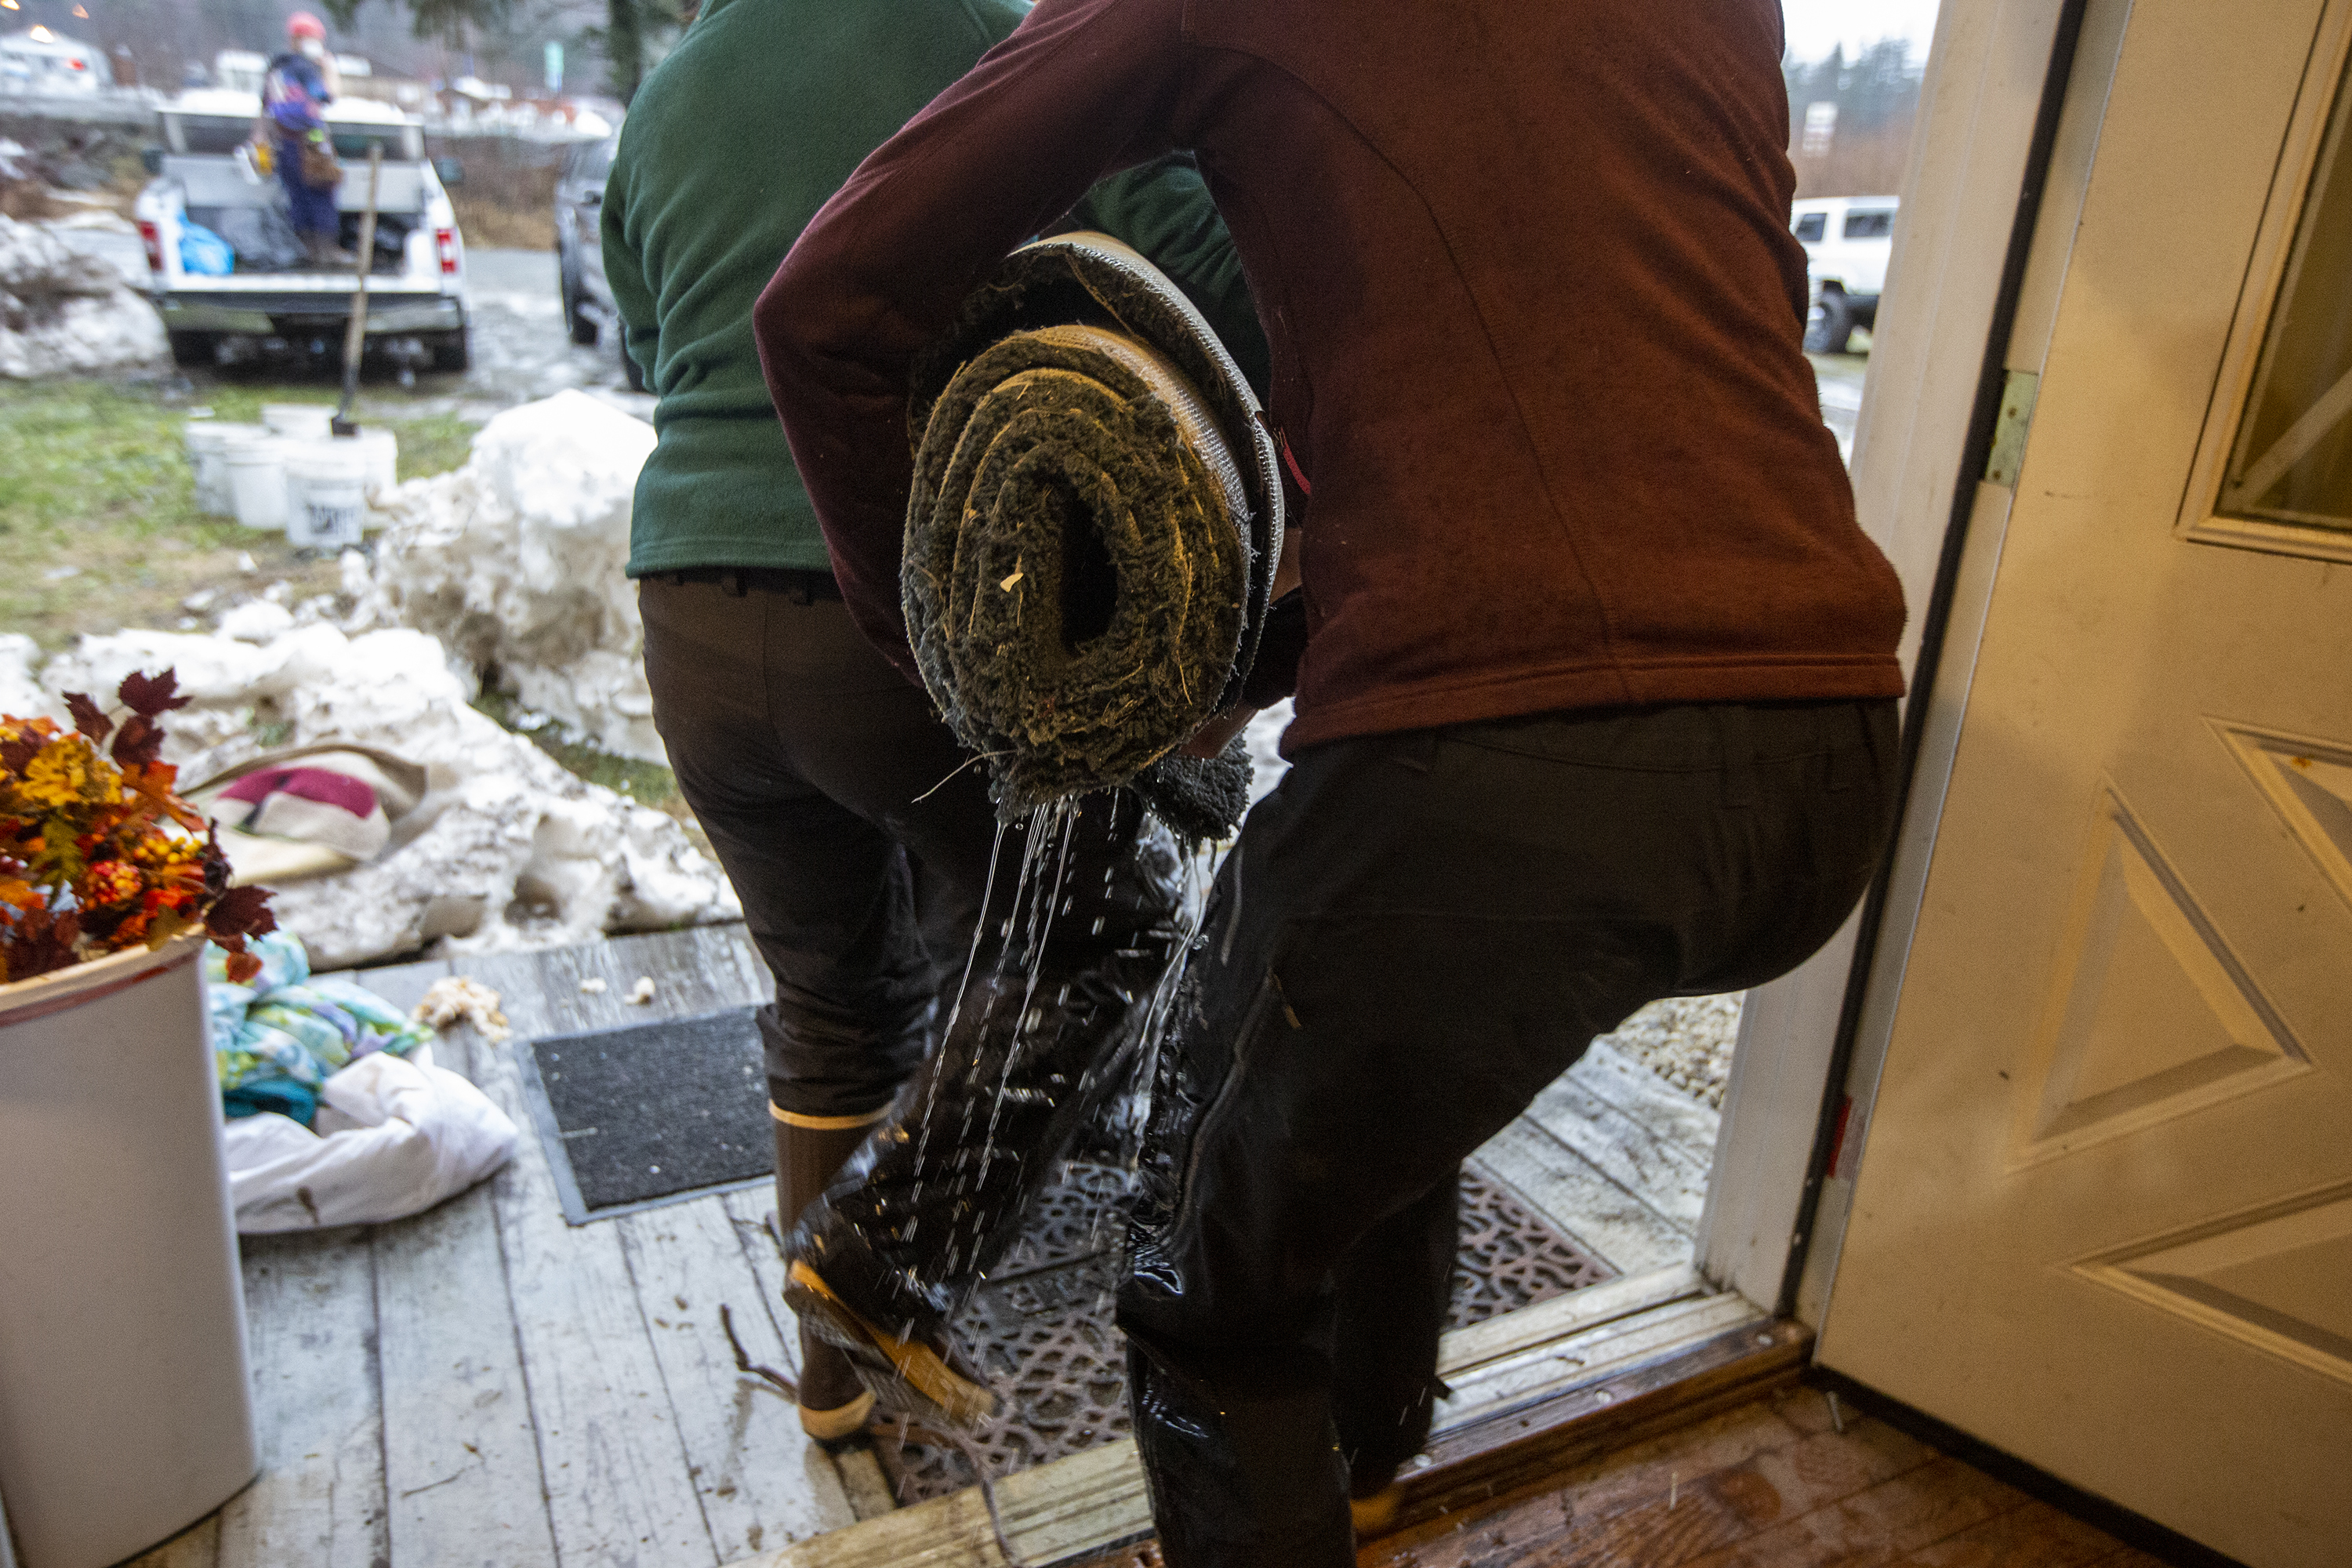 People carry soaking carpet out of a flooded house in Haines, Alaska.